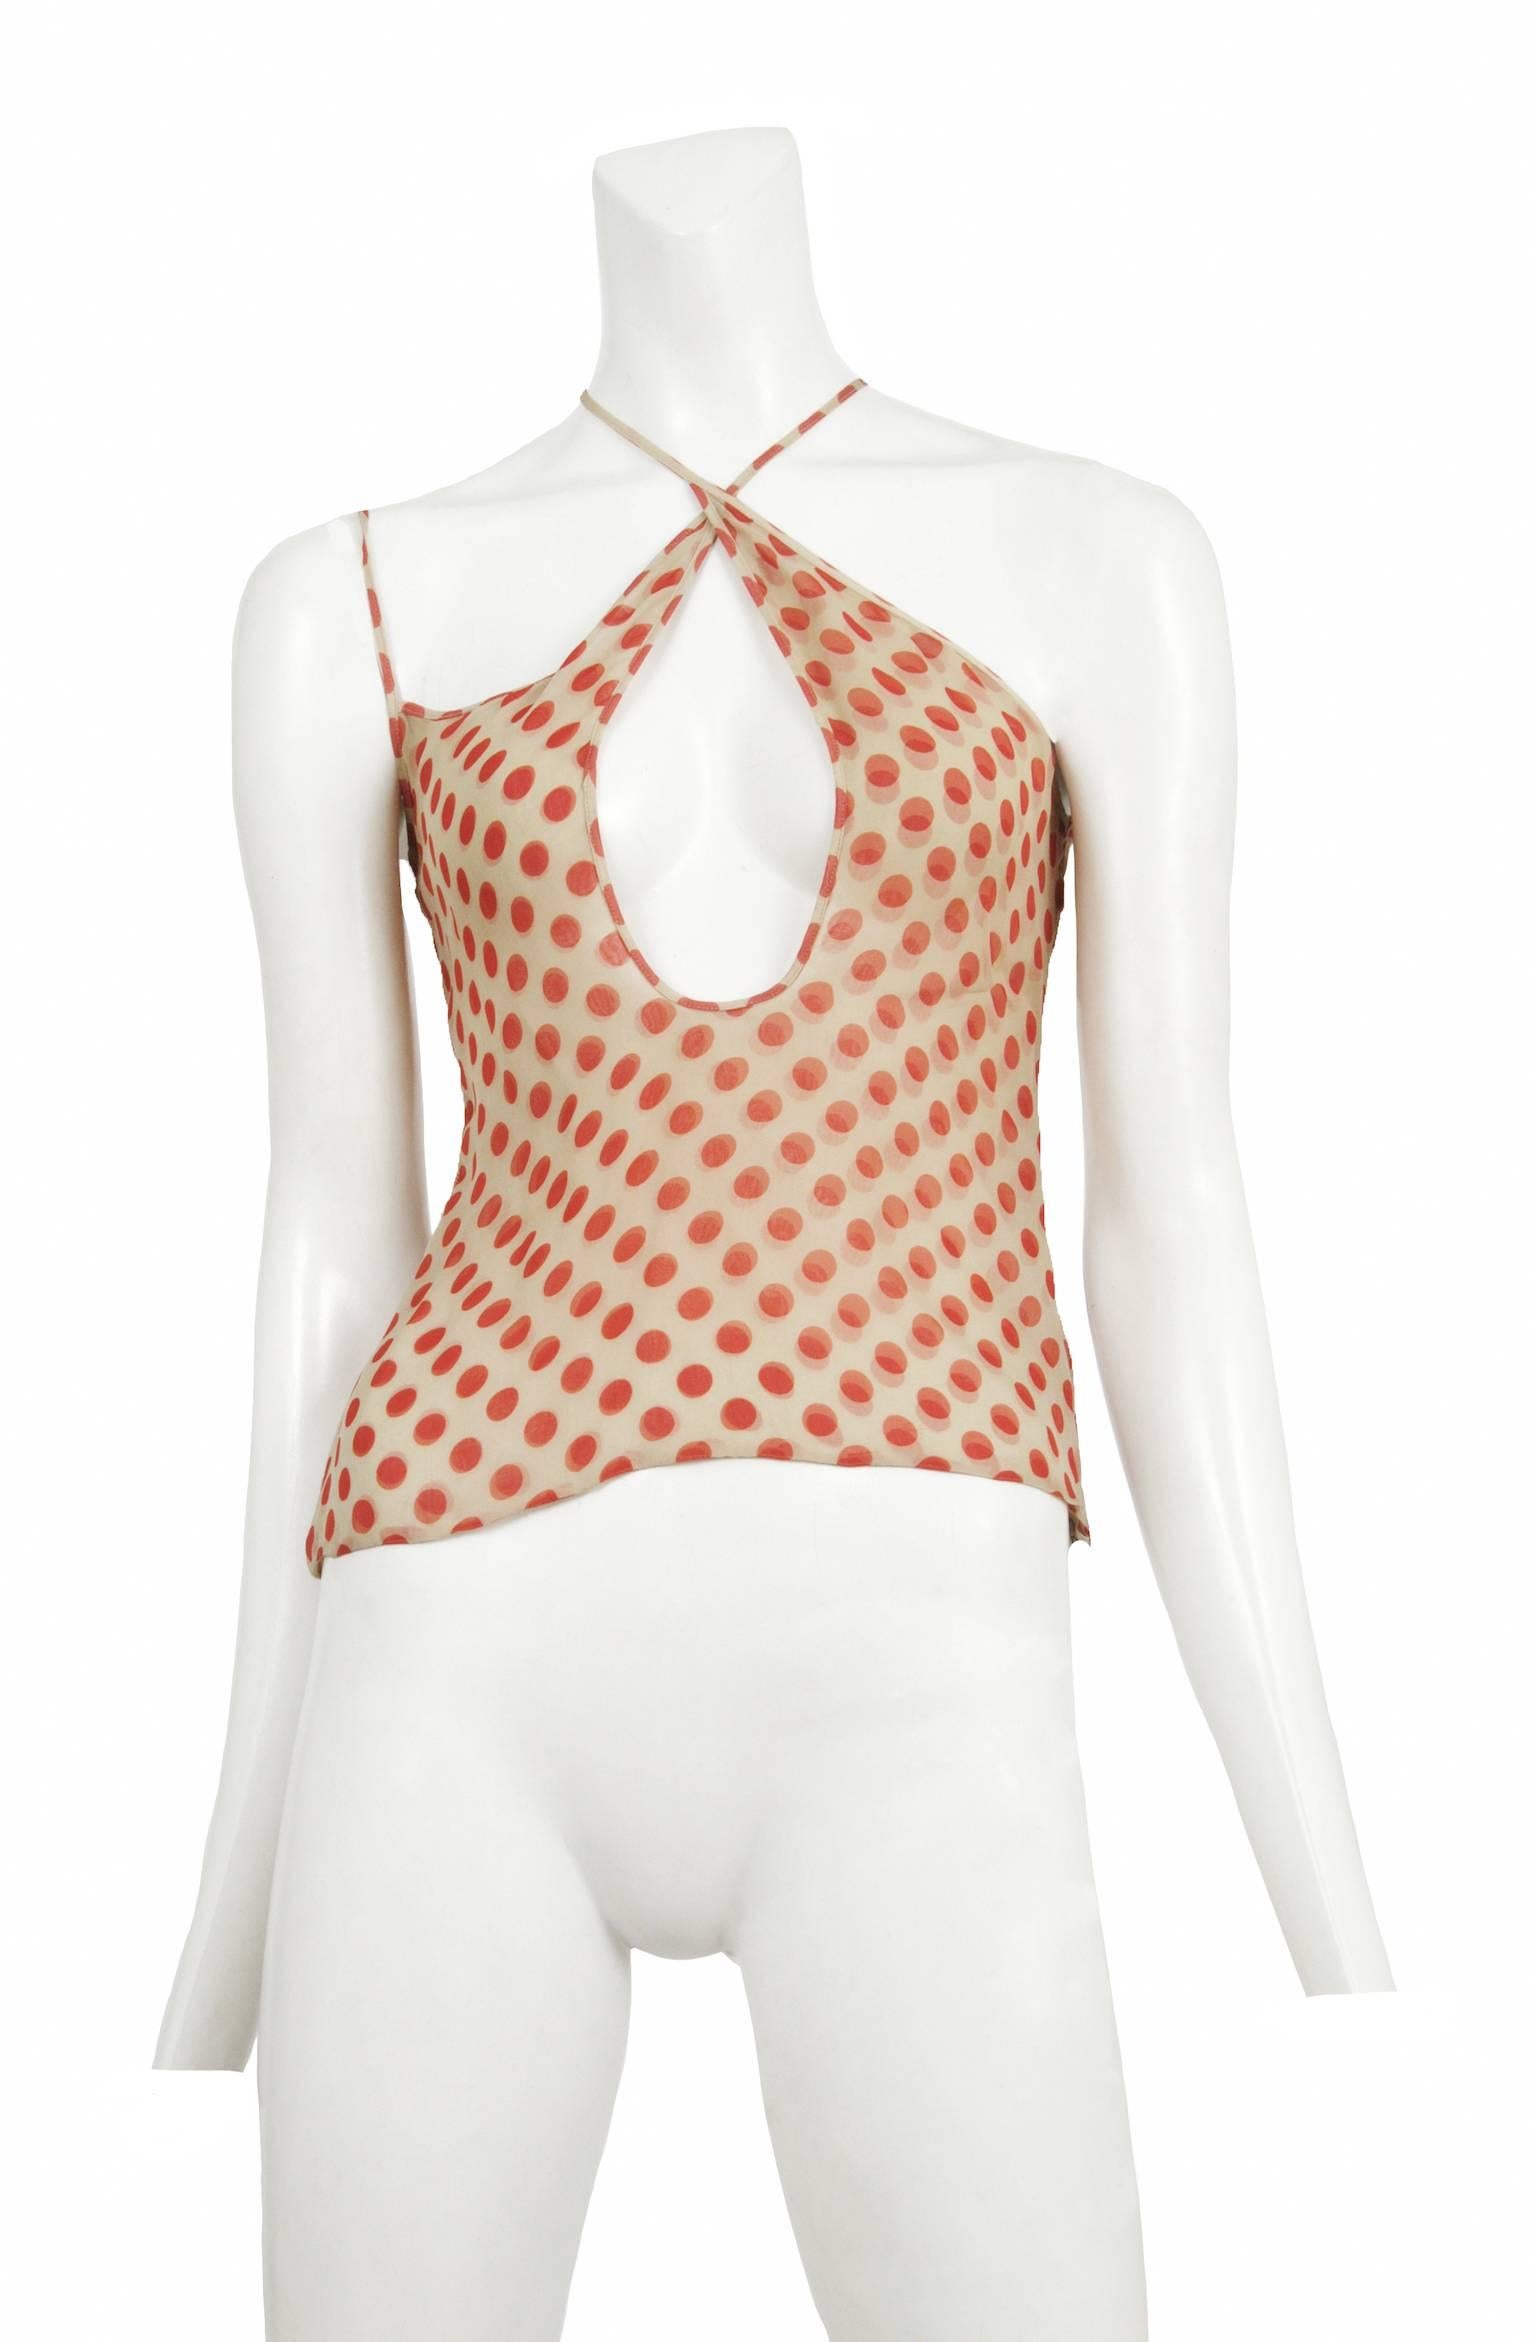 Vintage Alexander McQueen beige and red polka dot asymmetrical silk top with large keyhole at front. From The Dance of the Twisted Bull Spring / Summer 2002 Collection.